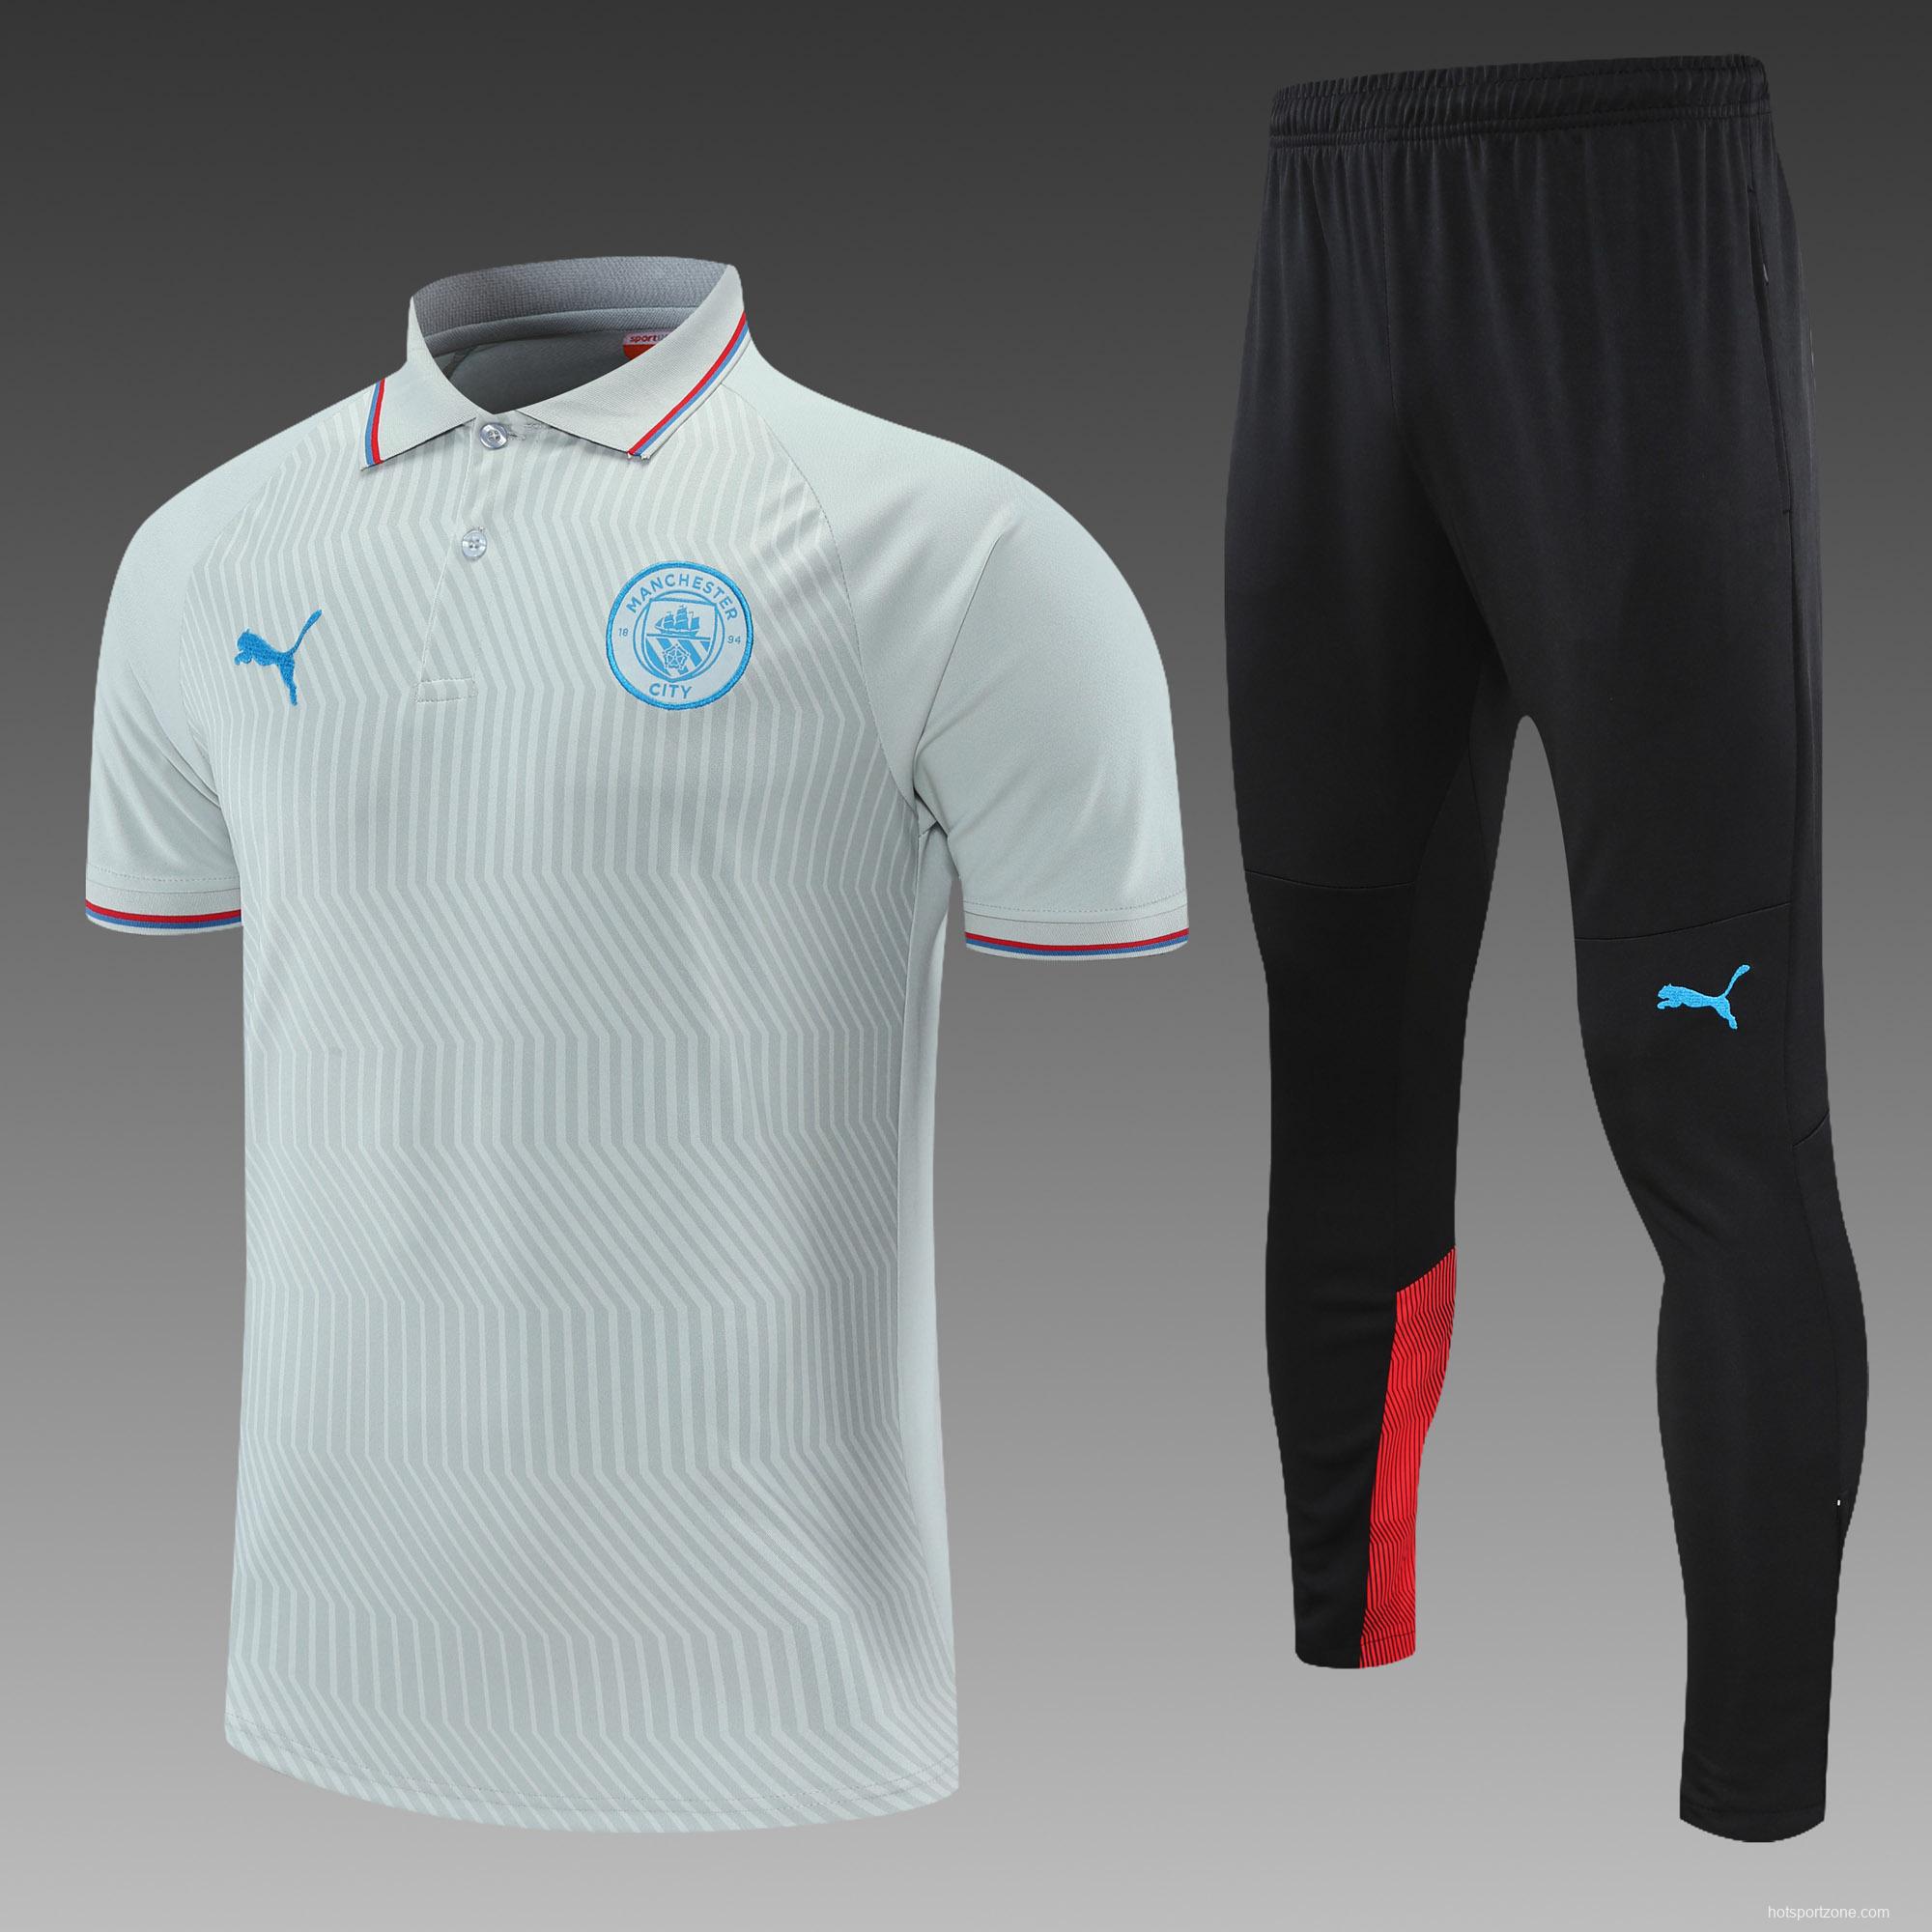 Manchester City POLO kit Light Grey (not supported to be sold separately)